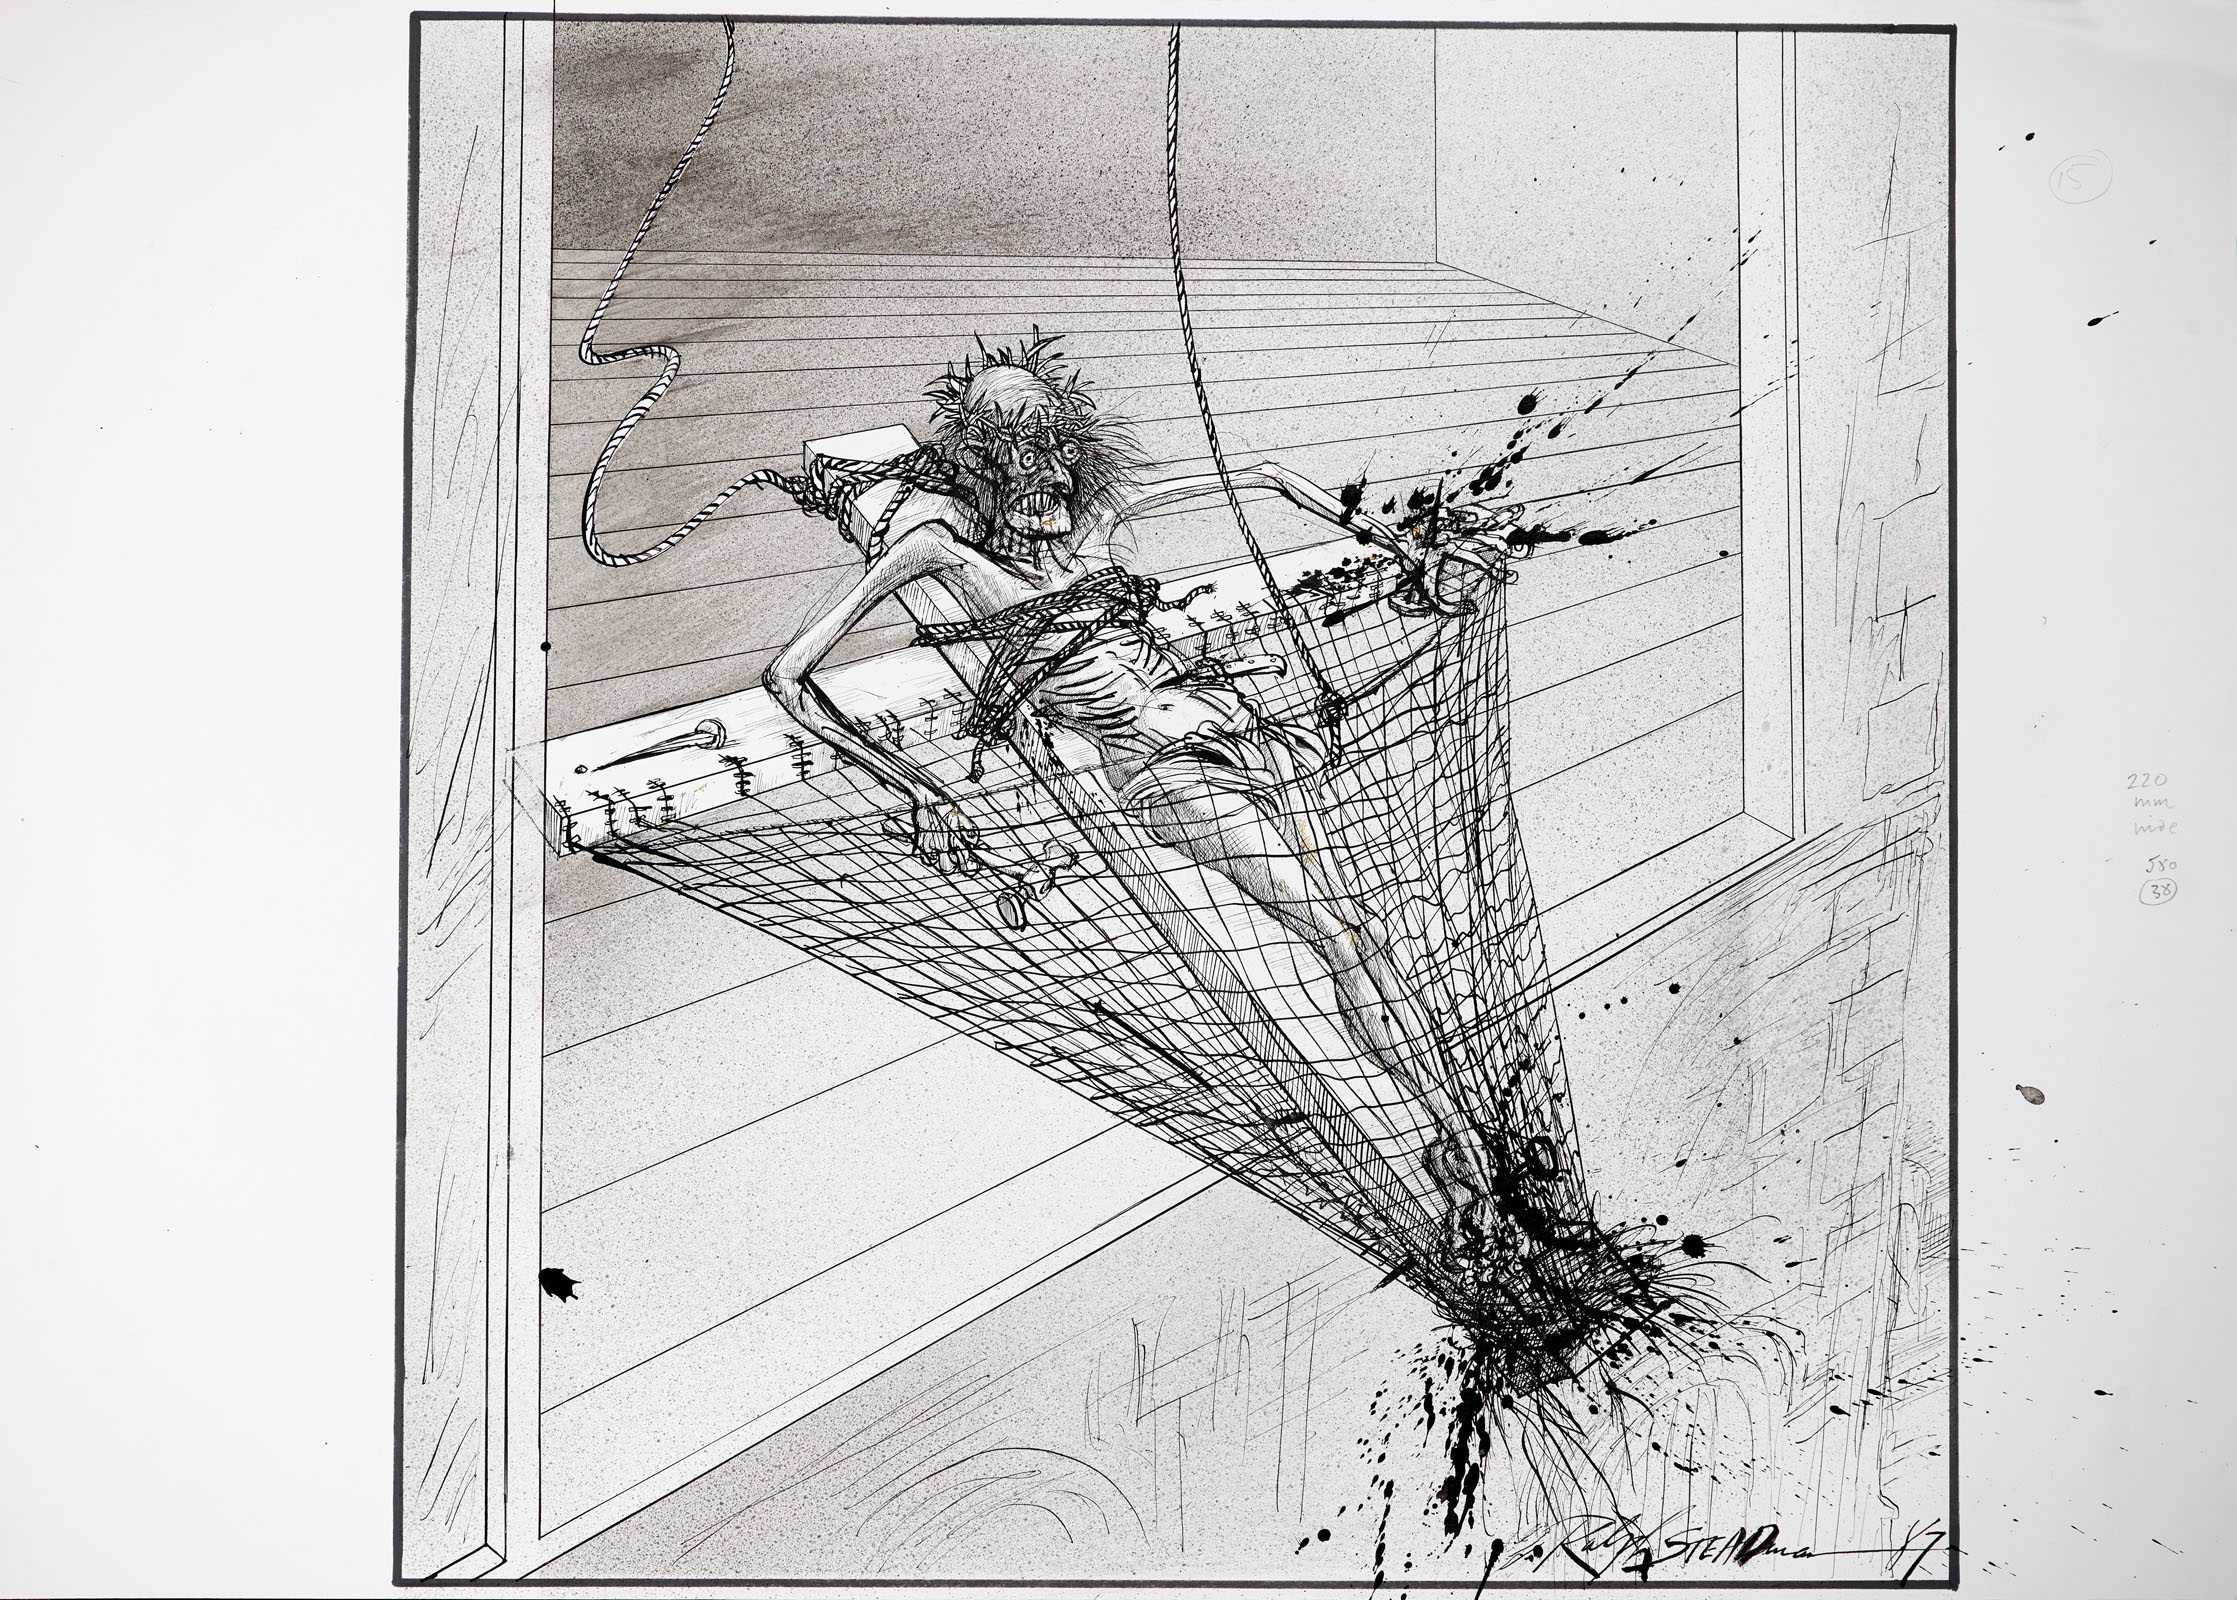 Ralph Steadman's collaboration with Will Self